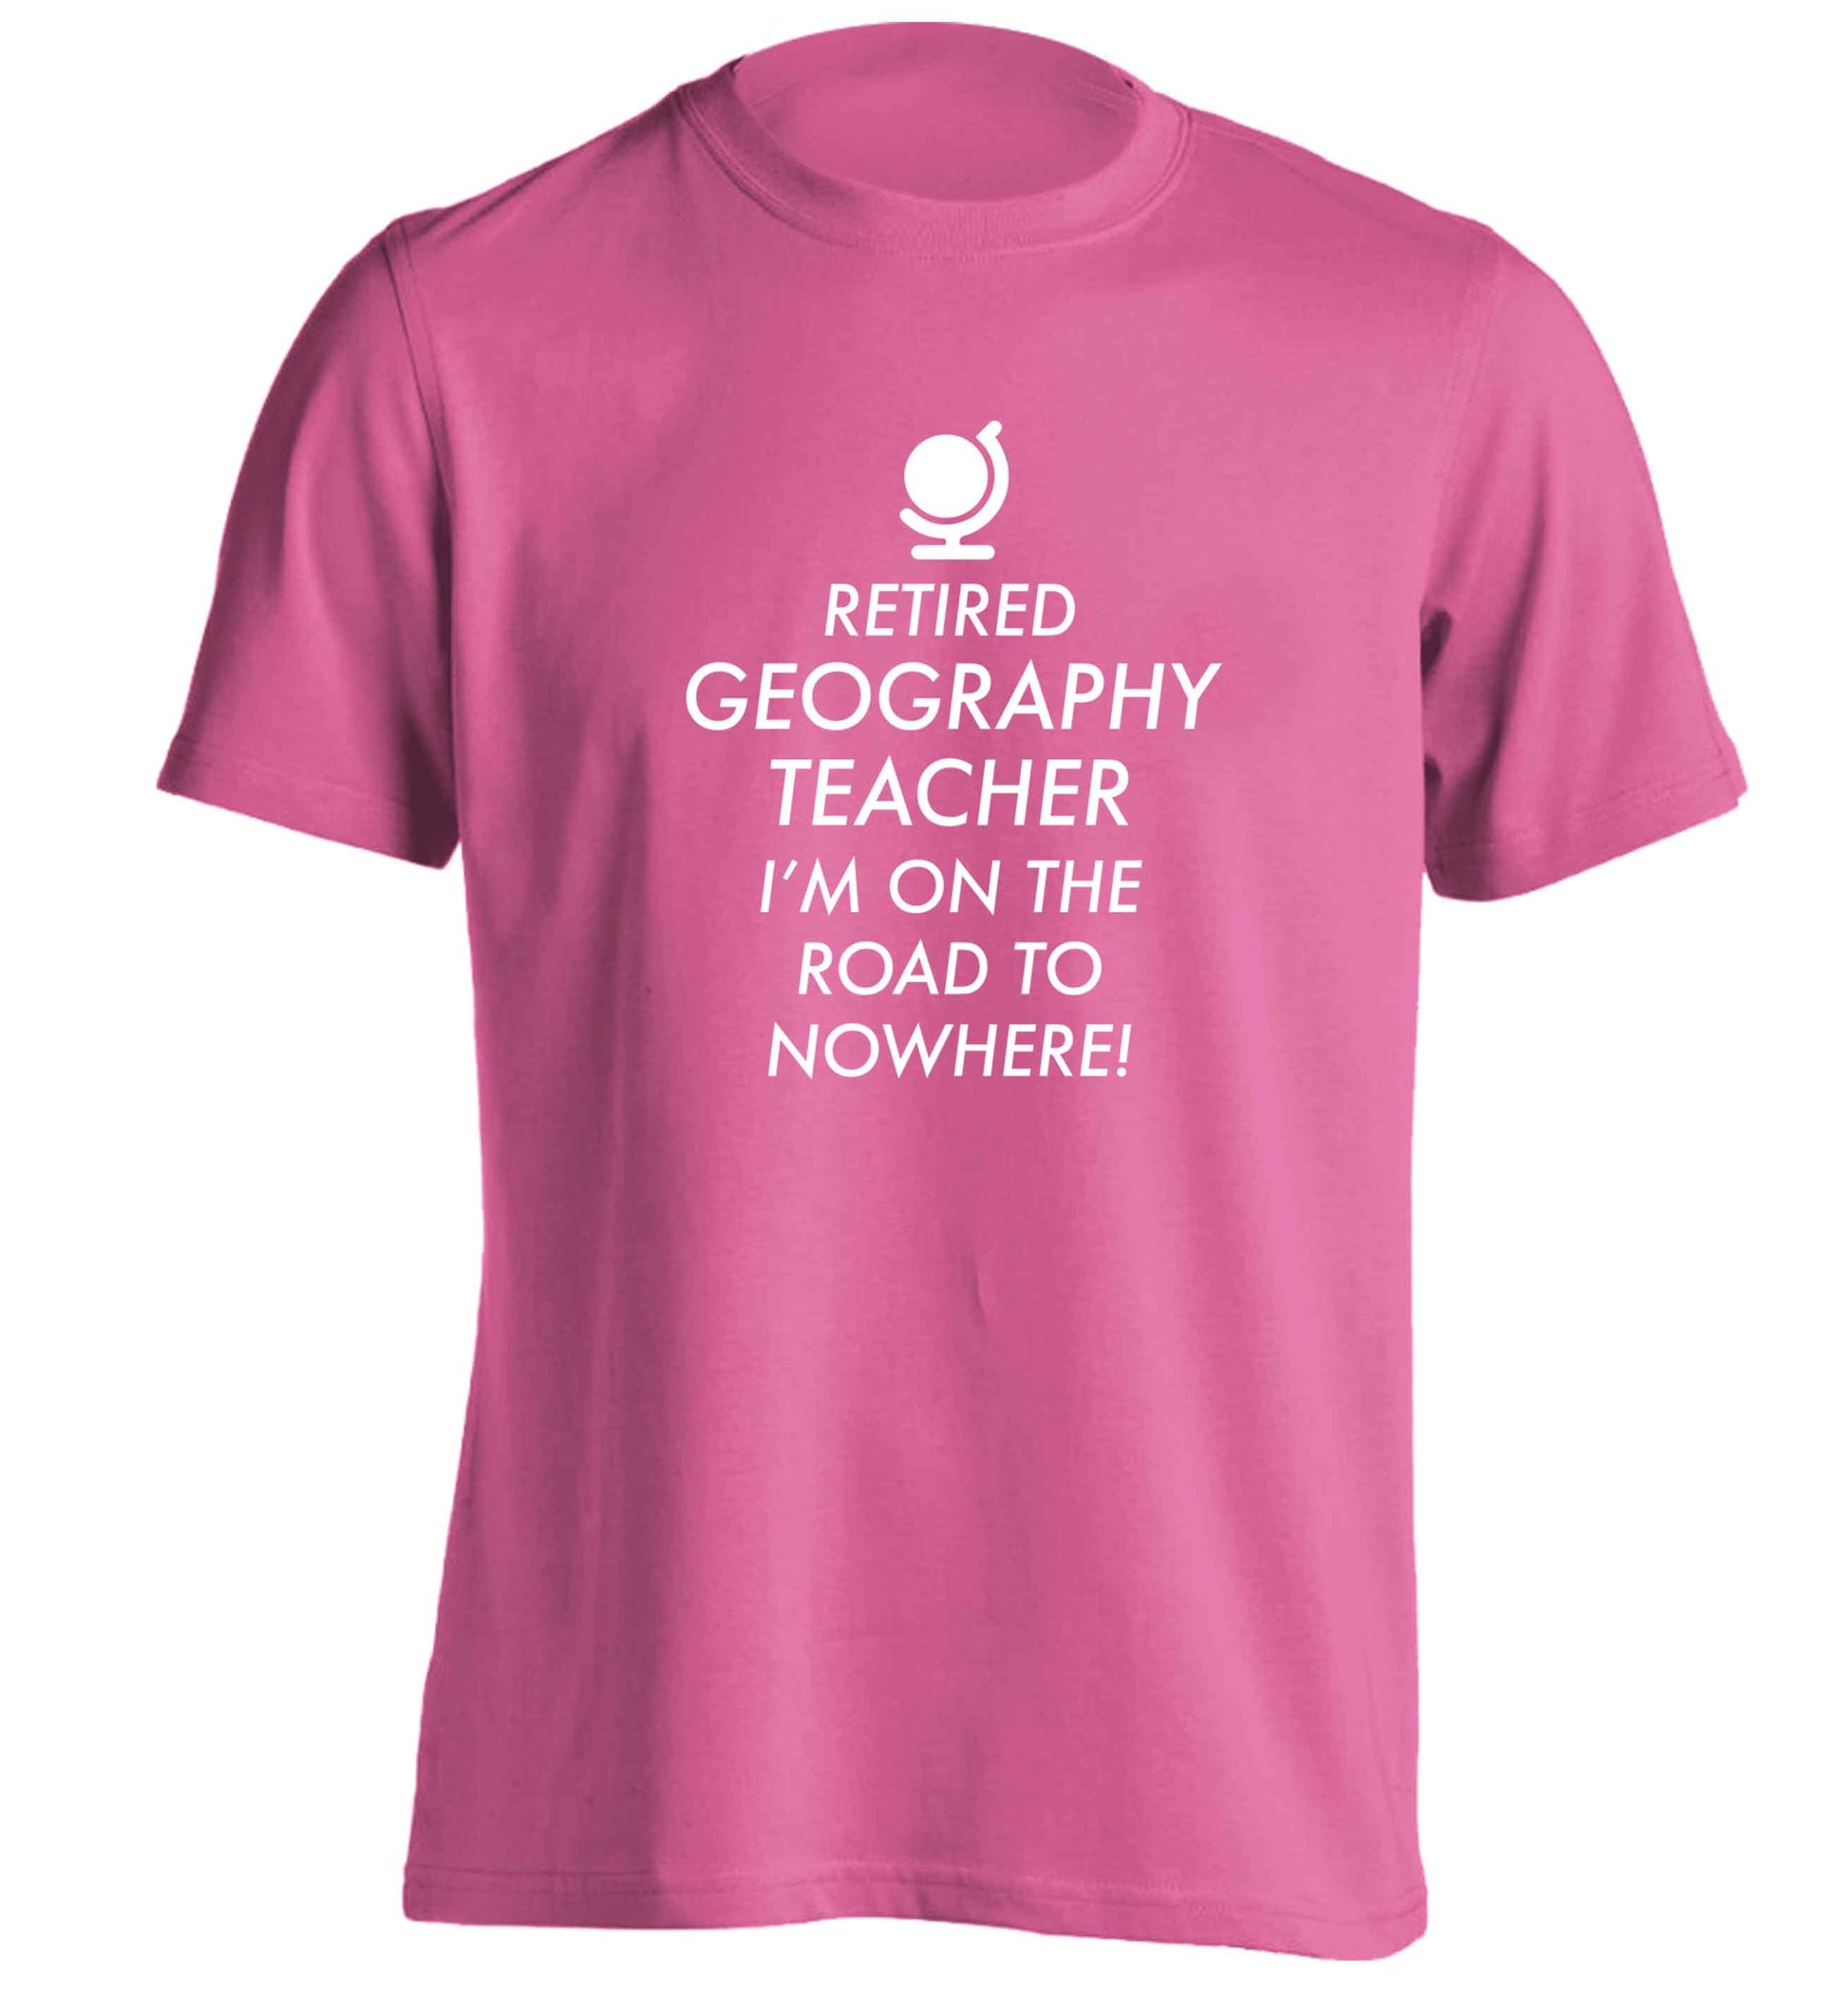 Retired geography teacher I'm on the road to nowhere adults unisex pink Tshirt 2XL